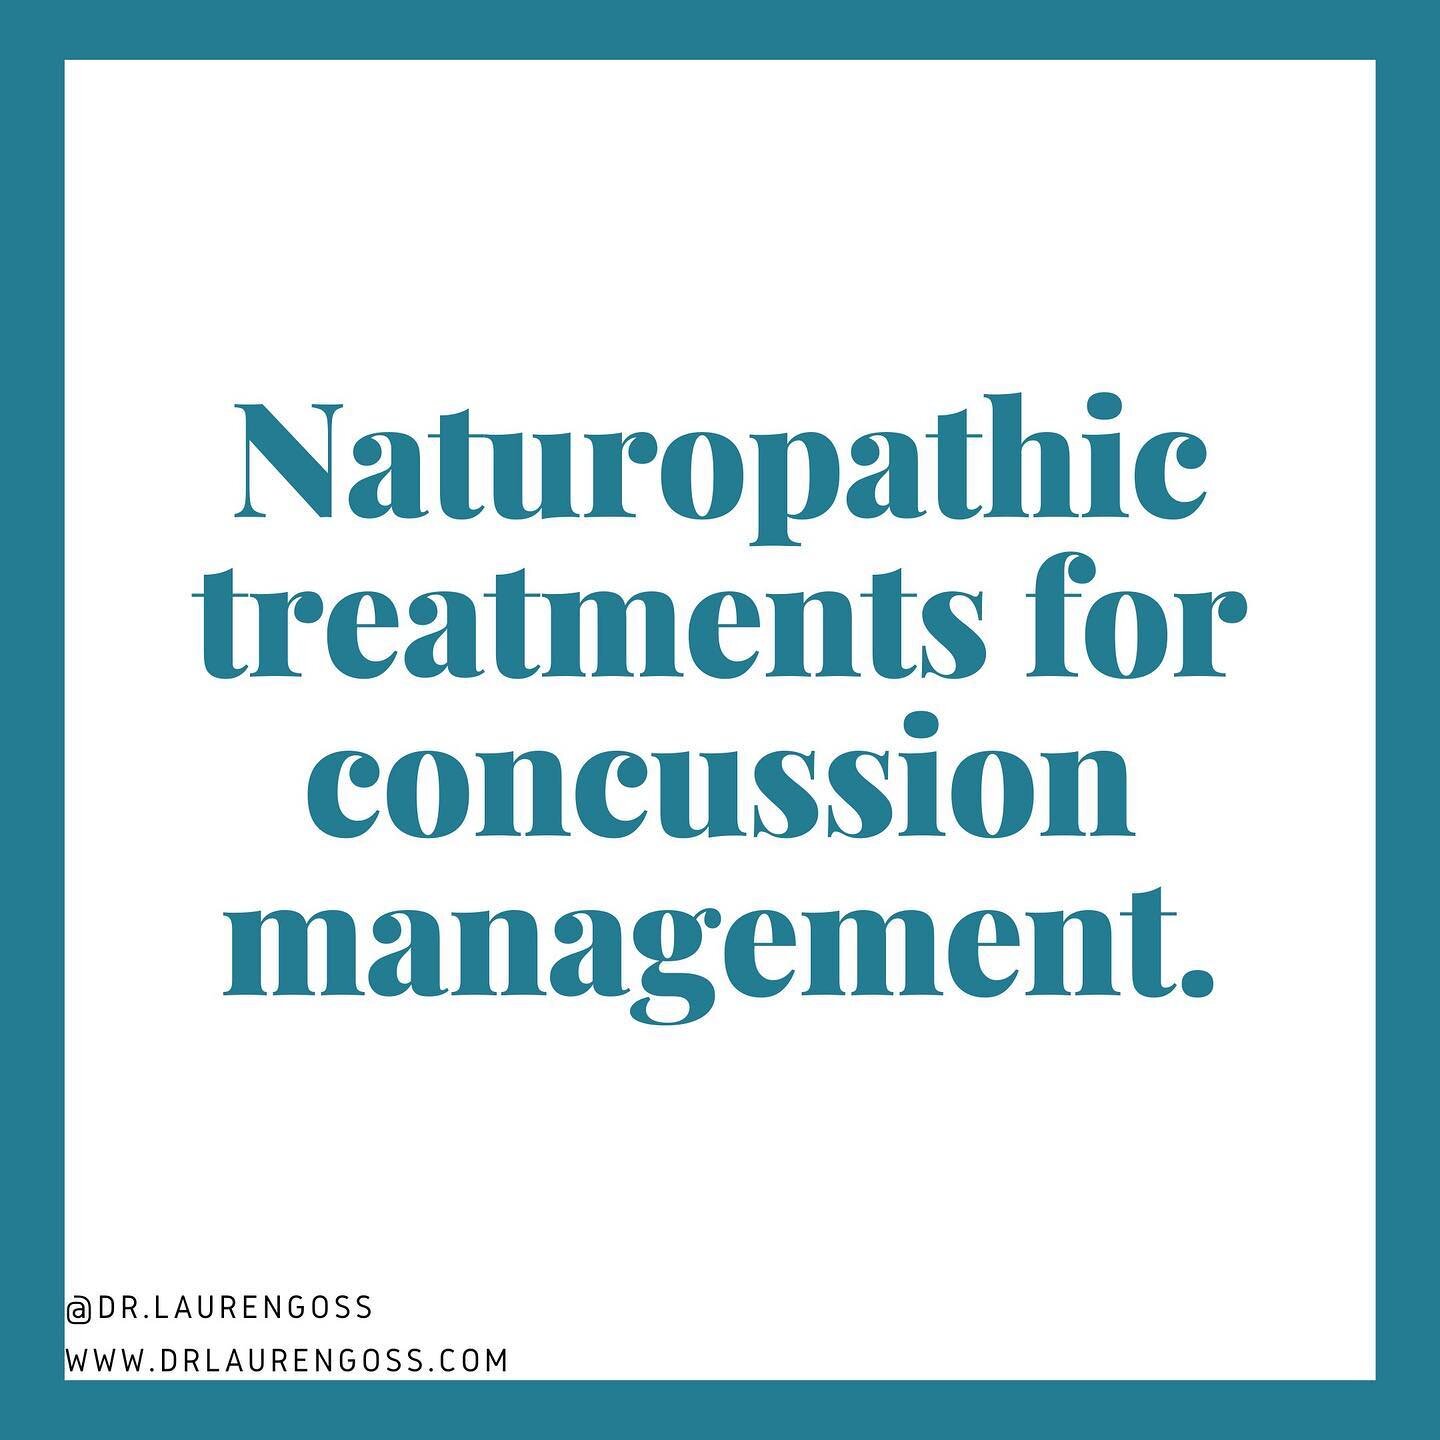 Still going! Part 2: How naturopathic medicine can help support your concussion healing! Please get specific recommendations from your healthcare provider and reach out if you have any questions. **This is information, not medical advice**

🌿Support